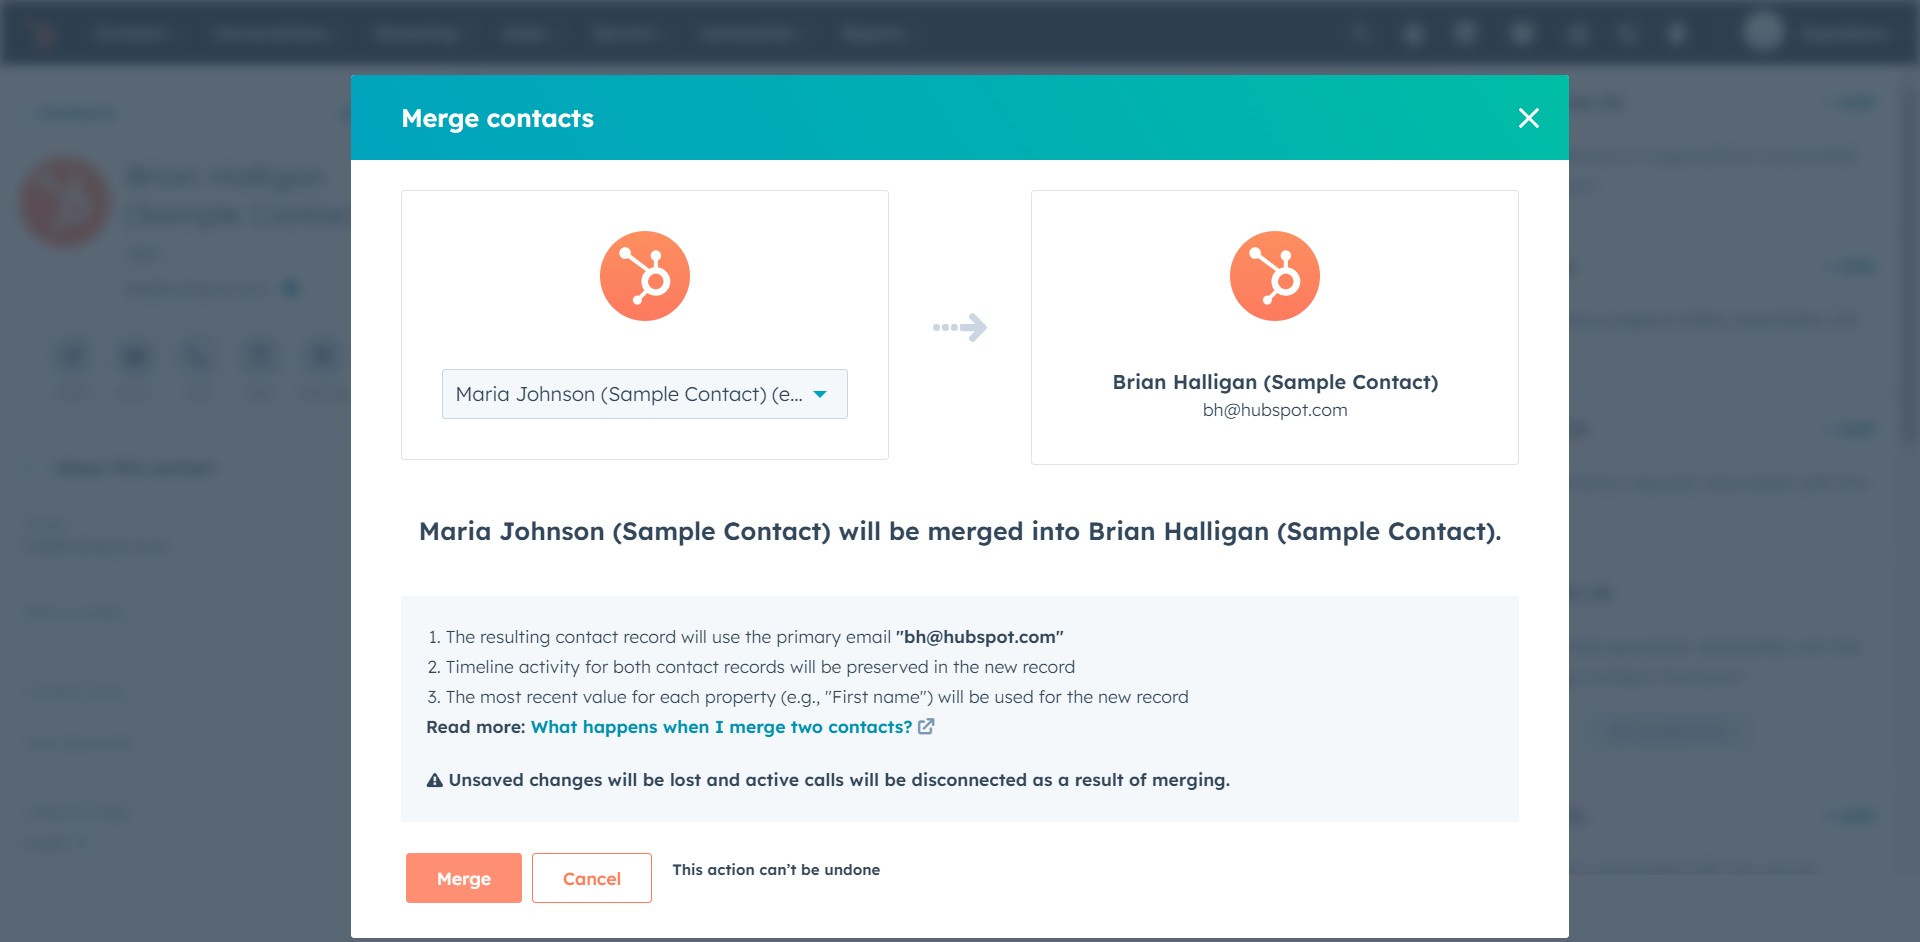 How to merge contacts in HubSpot